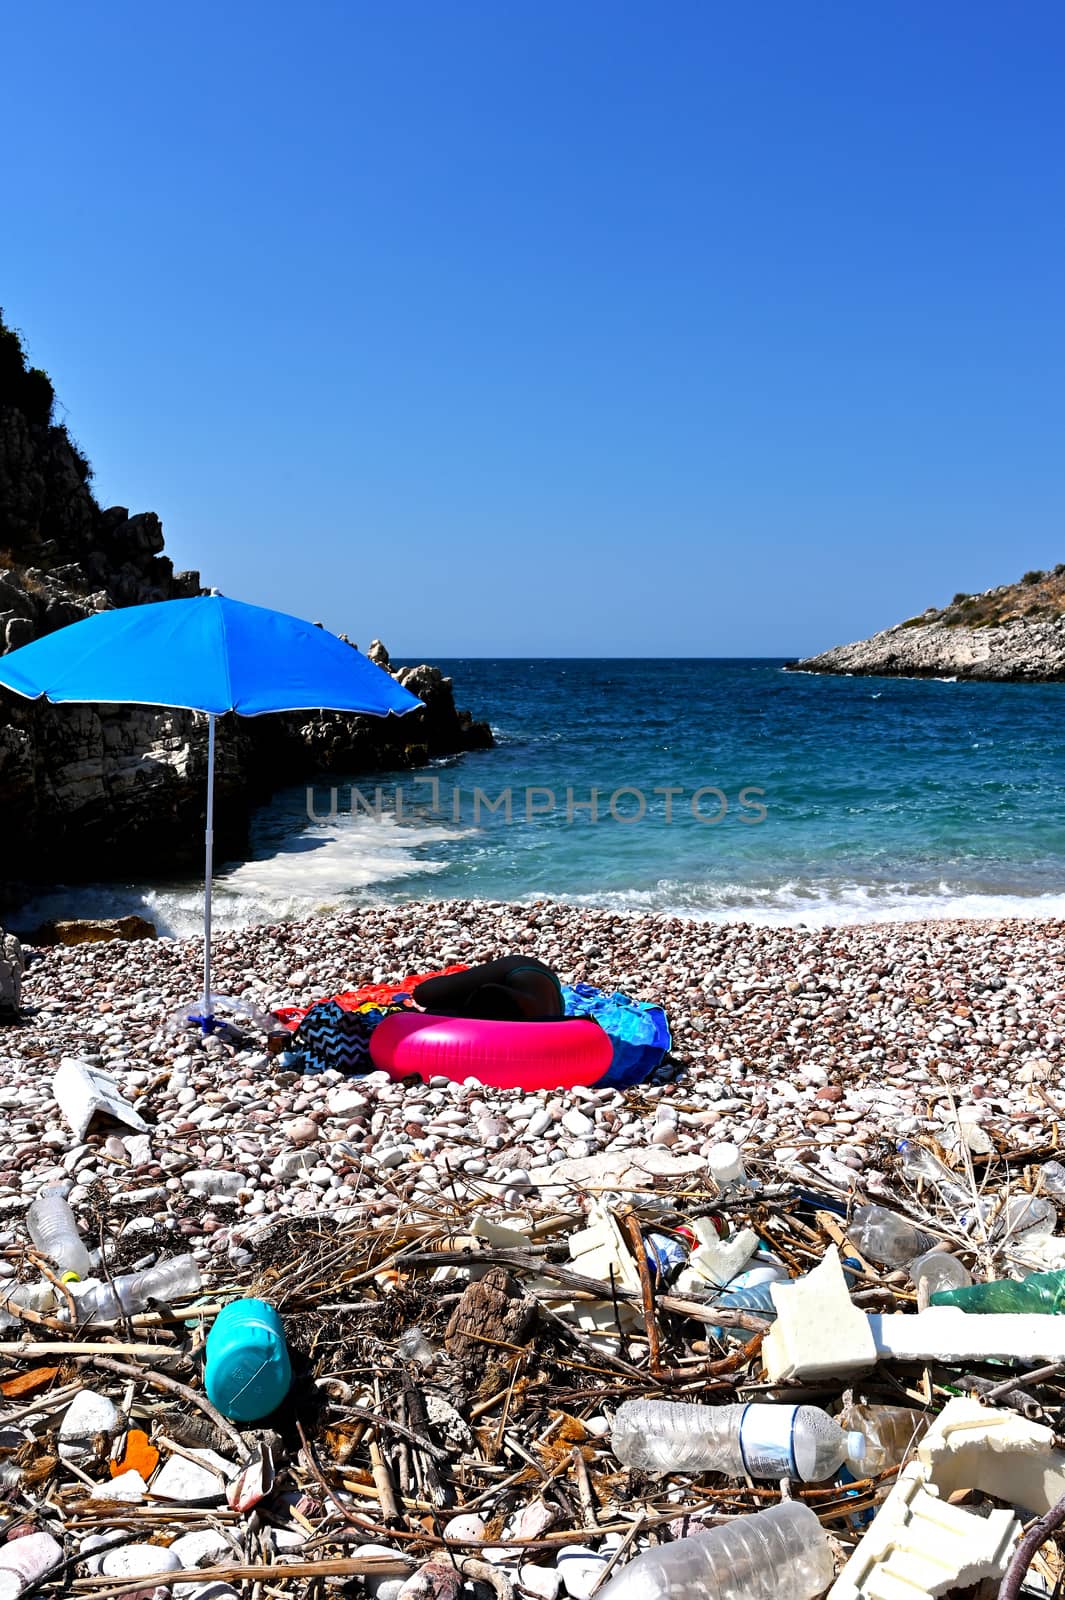 Dirty beach of Albania coast with girl sleeping in background. Empty, used dirty plastic bottles. Environmental pollution. Ecological problem.